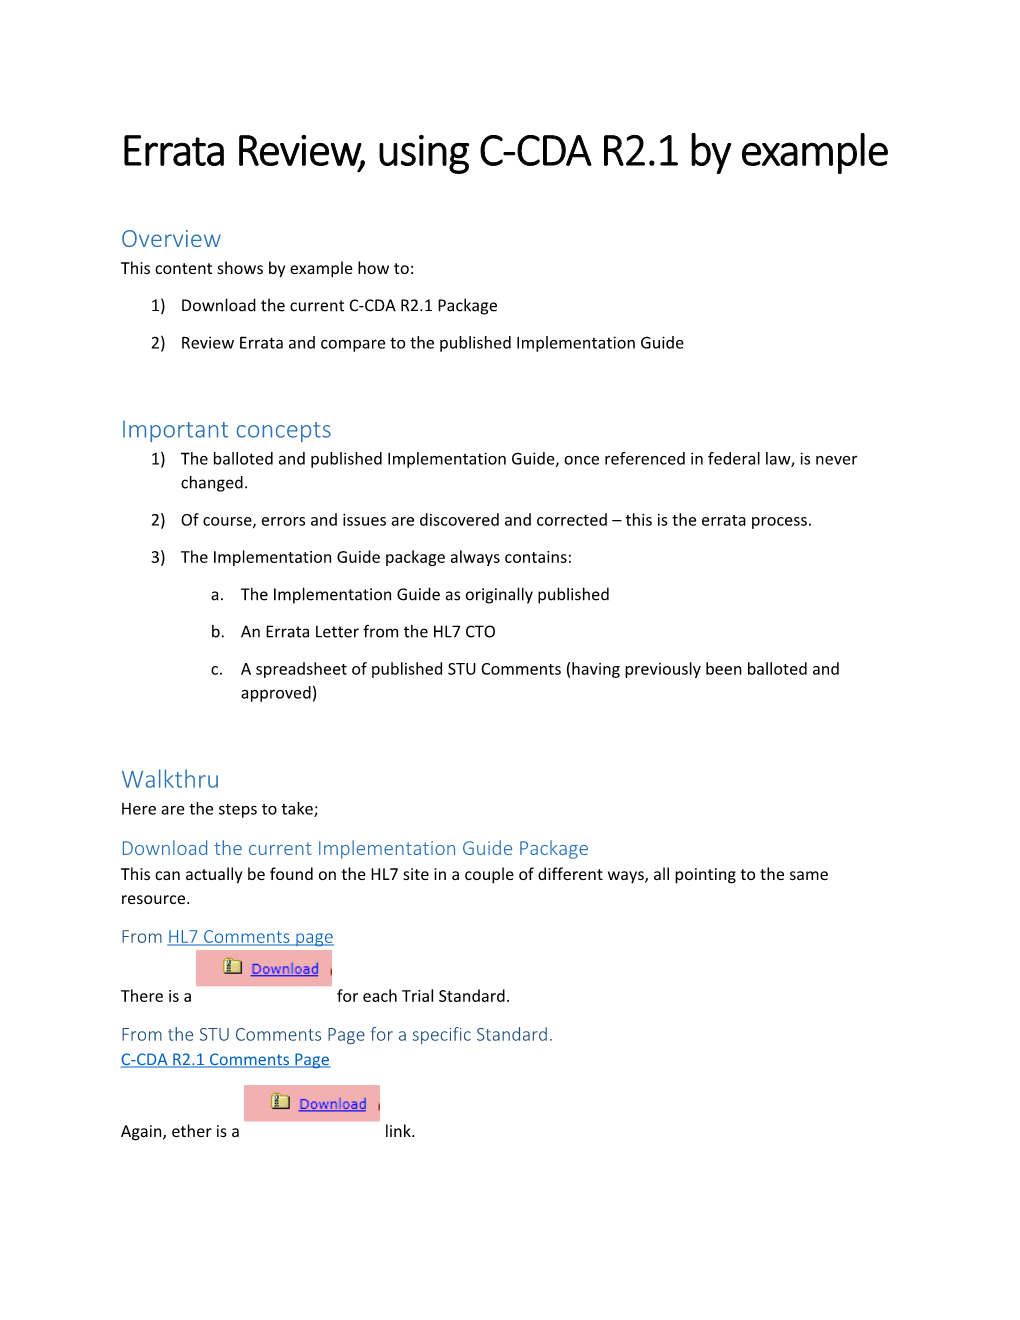 Errata Review, Using C-CDA R2.1 by Example